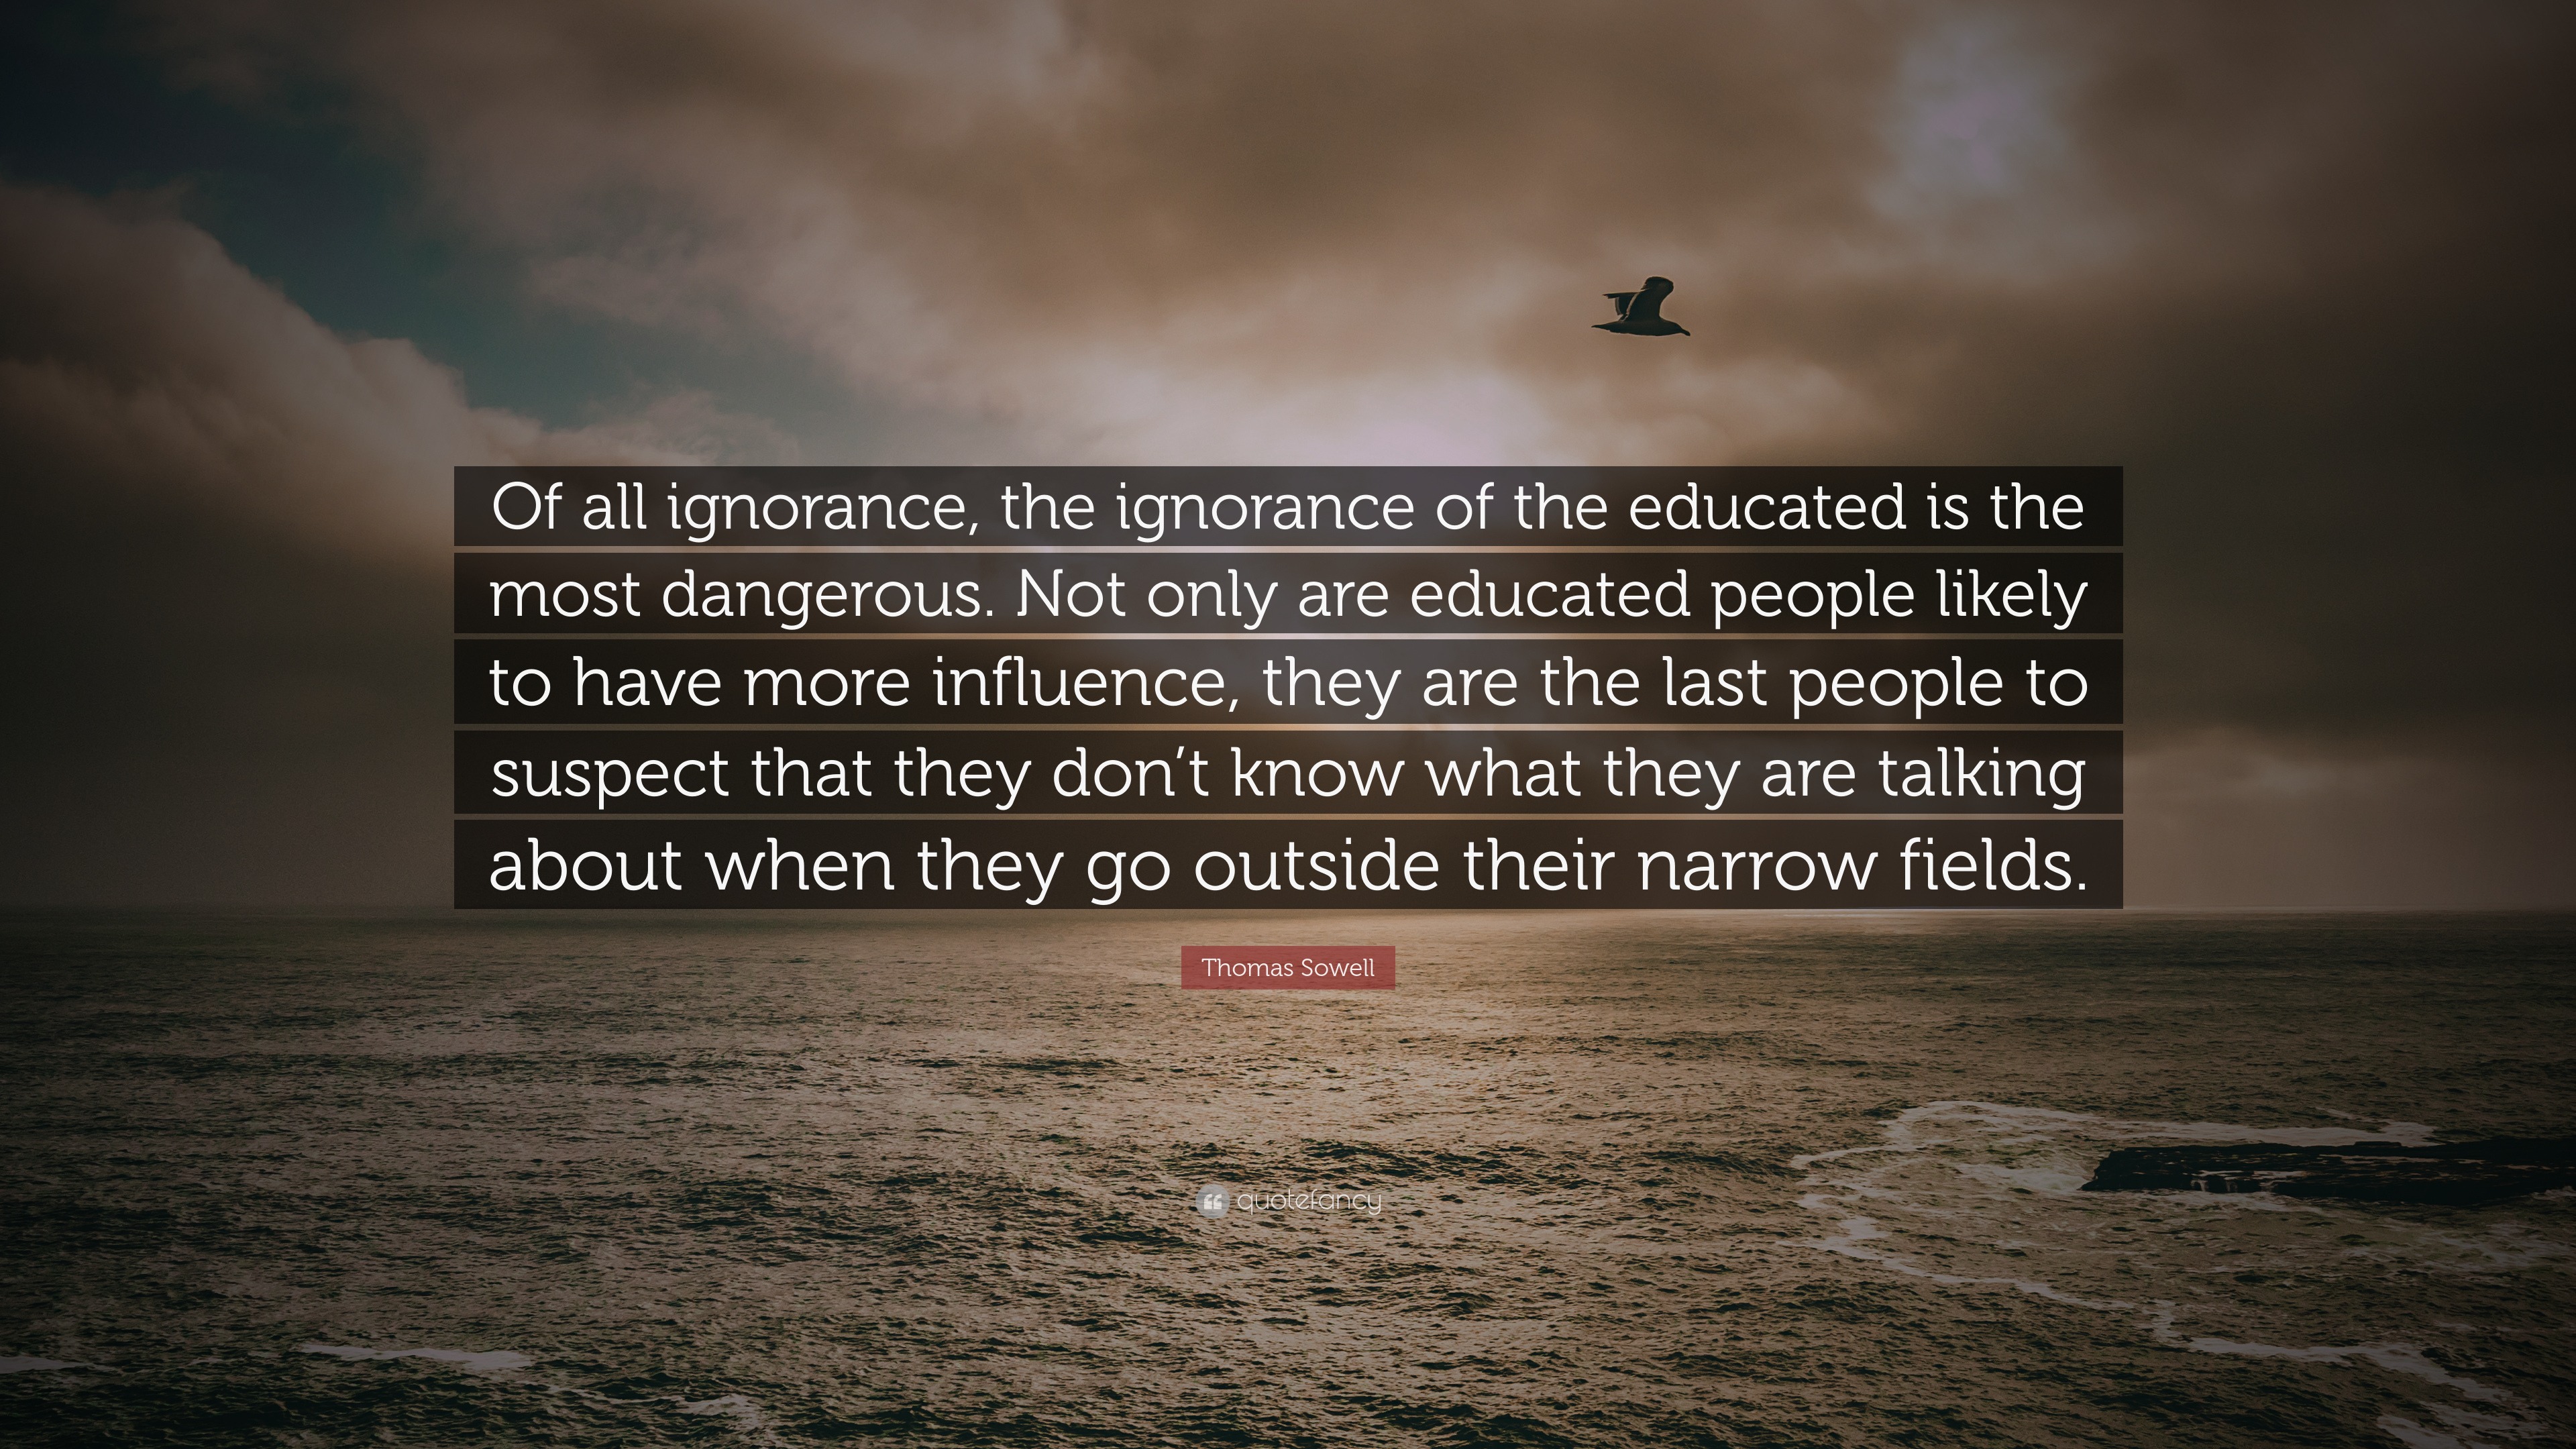 Thomas Sowell Quote: “Of all ignorance, the ignorance of the educated